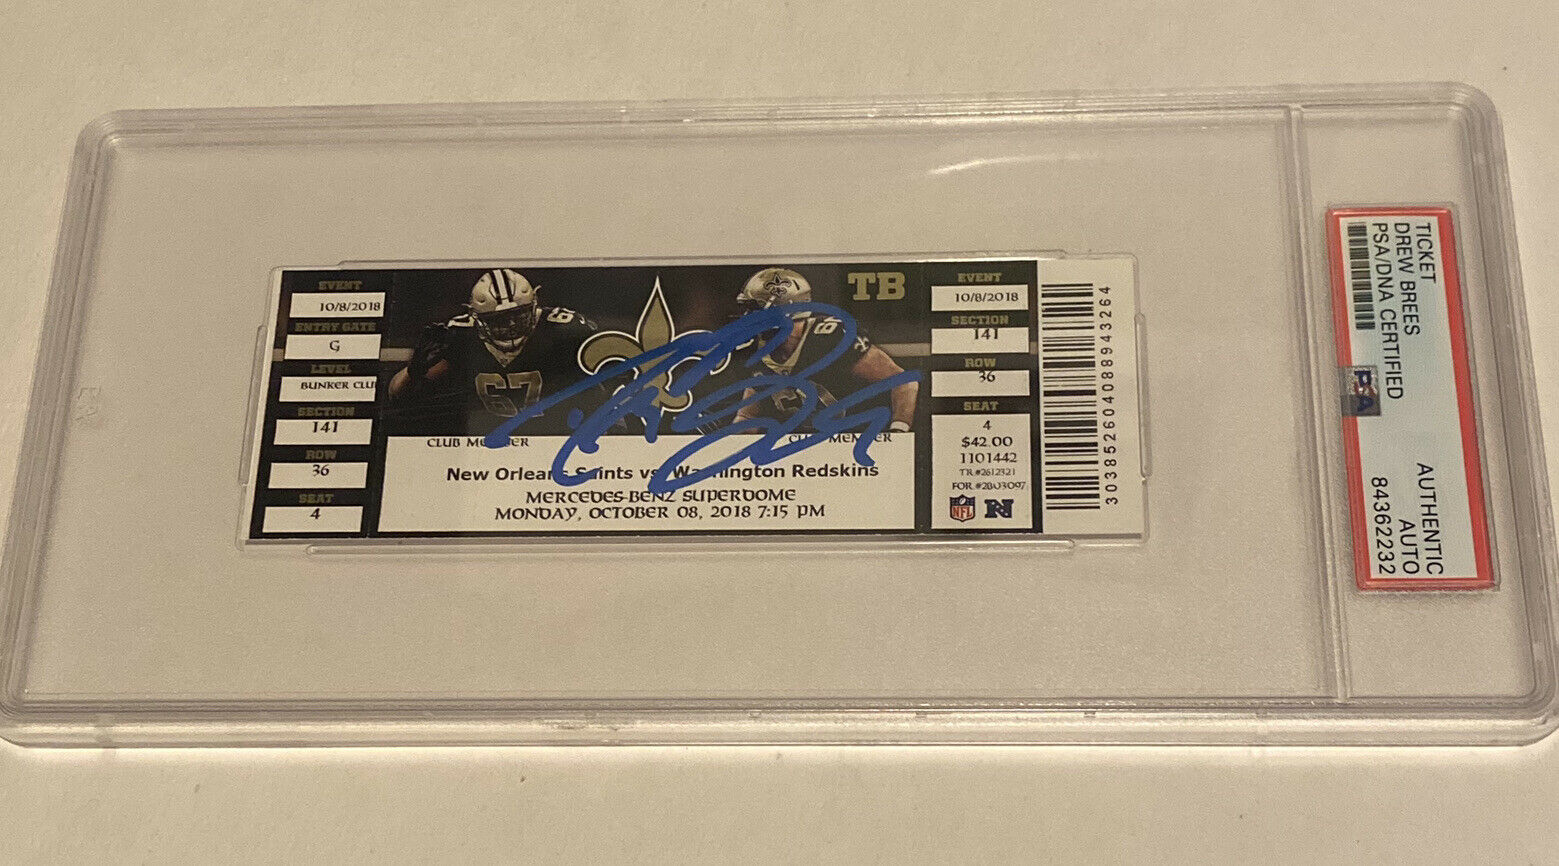 Drew Brees Signed Nfl Passing Yards Record Ticket Psa Encapsulated